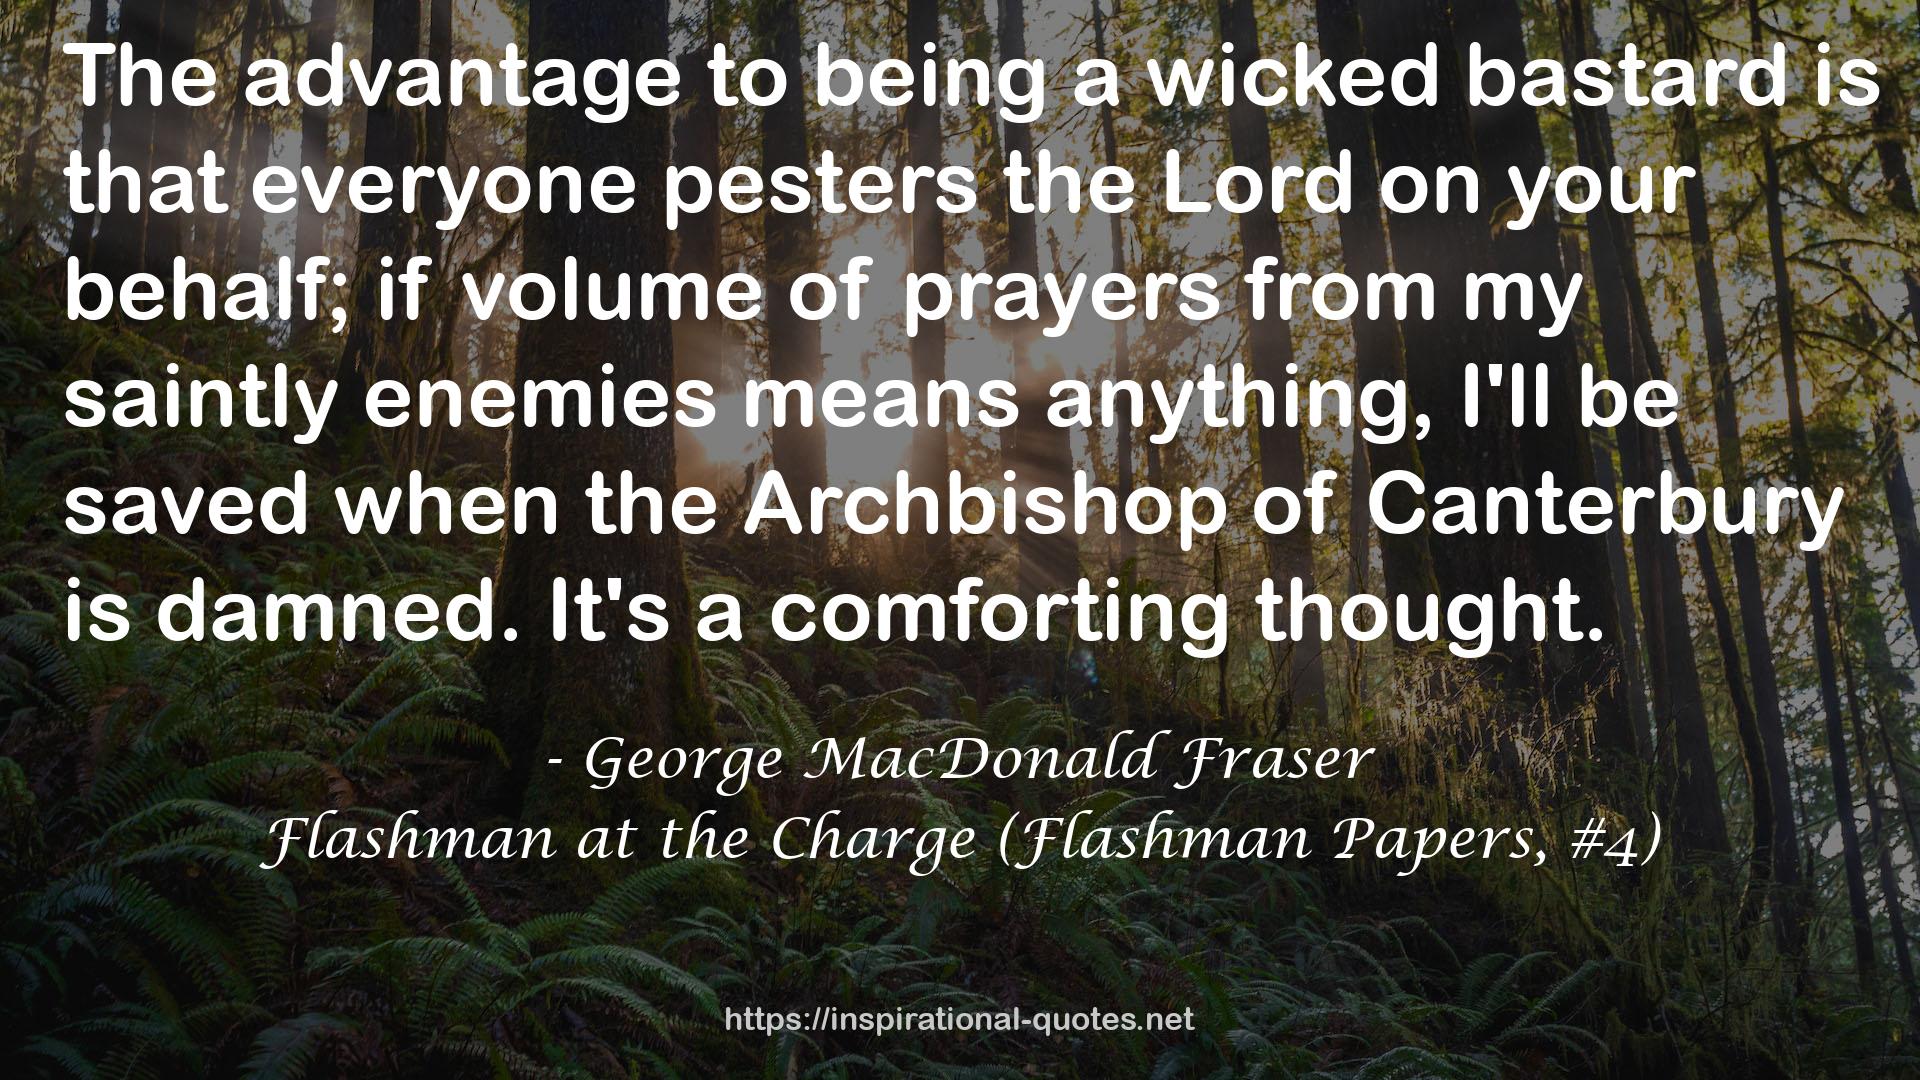 Flashman at the Charge (Flashman Papers, #4) QUOTES